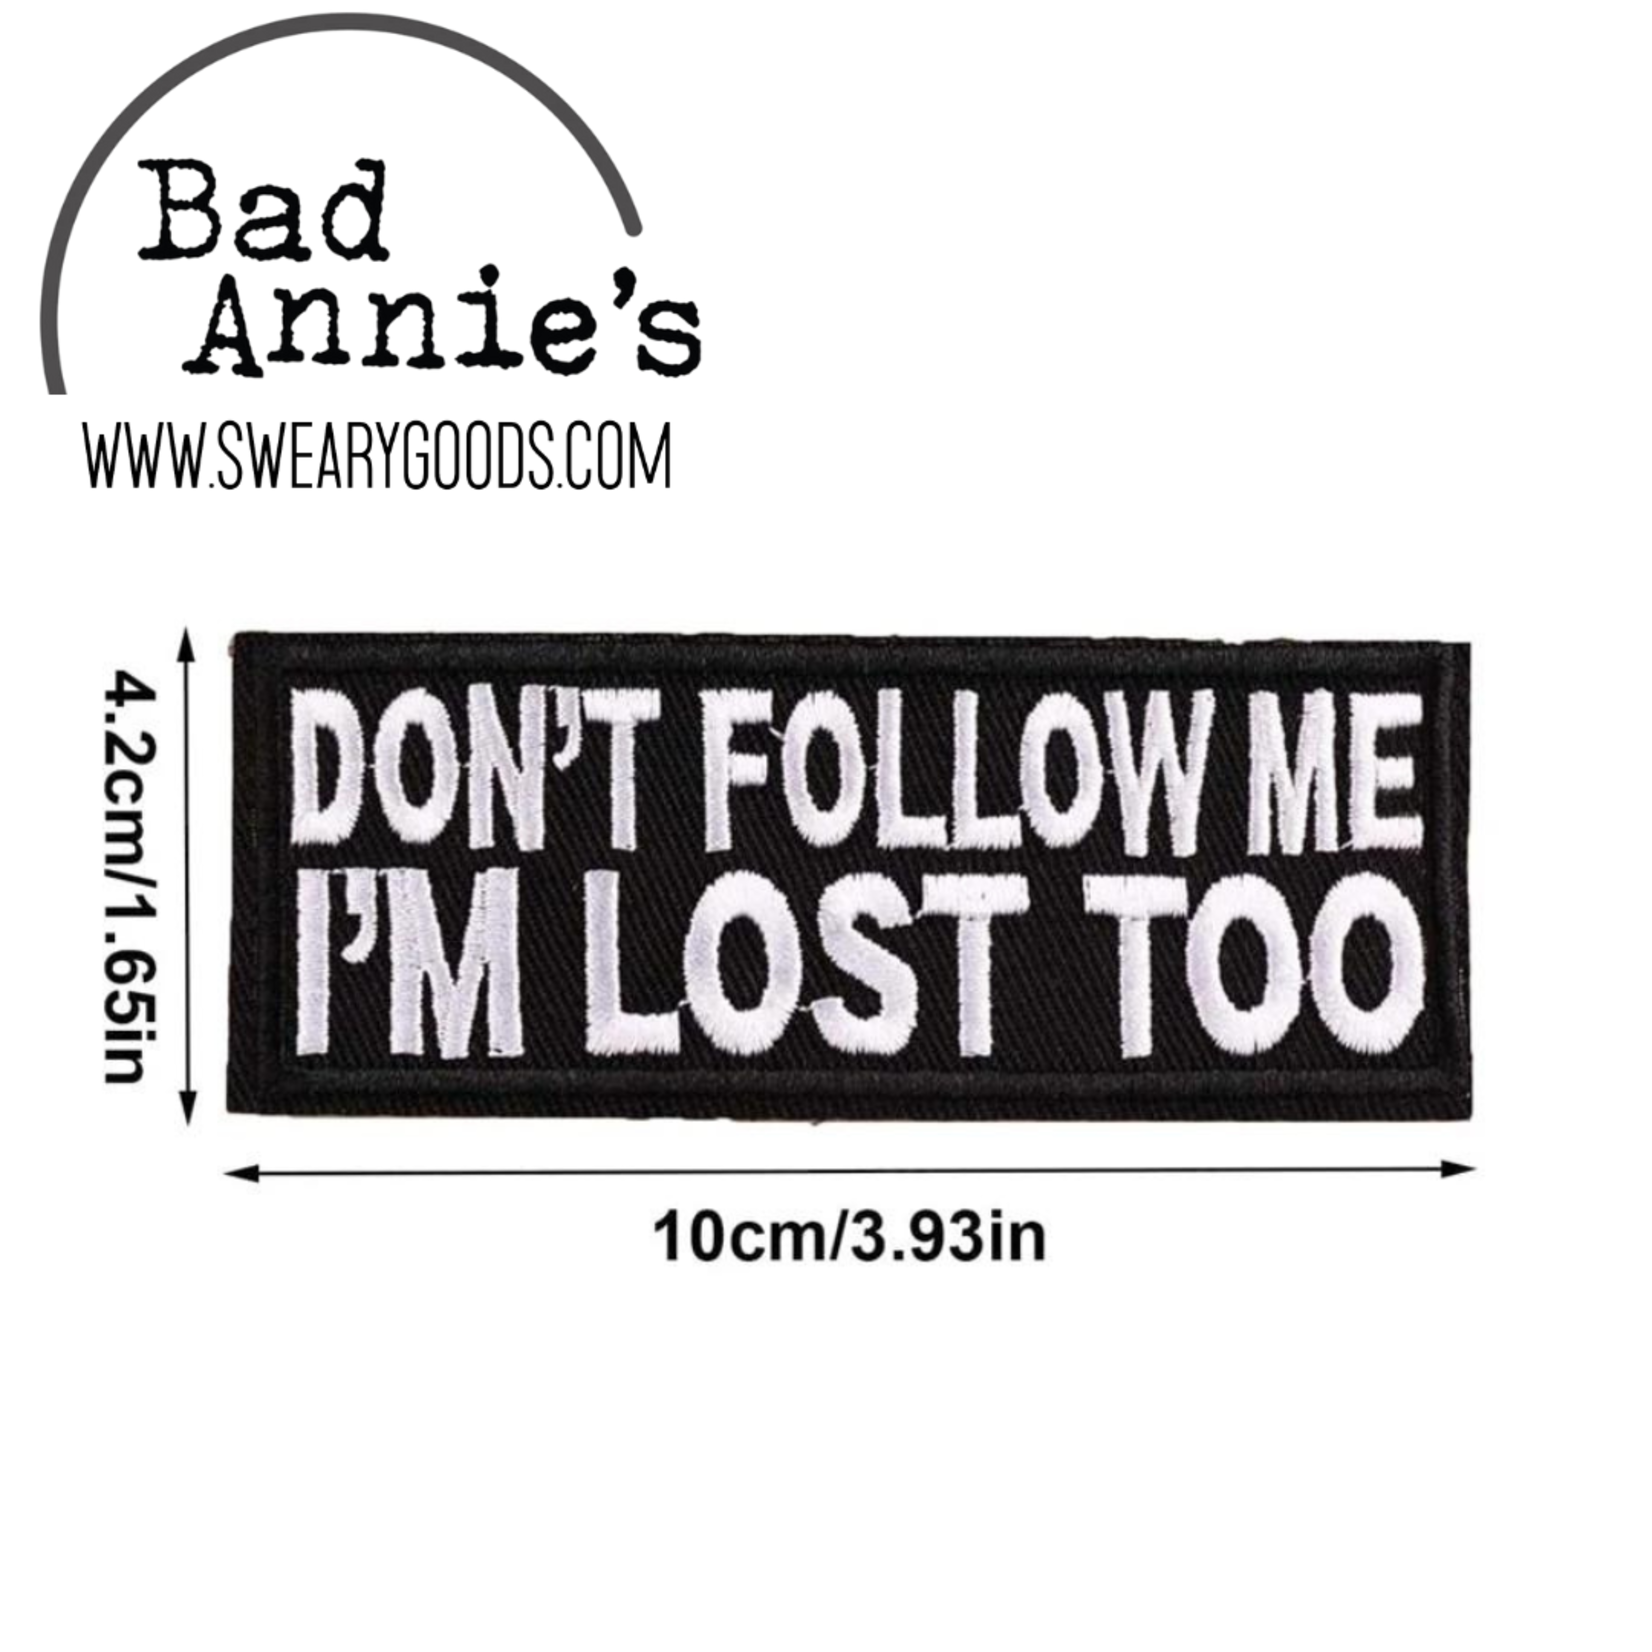 Patch - Don't Follow Me. I'm Lost Too